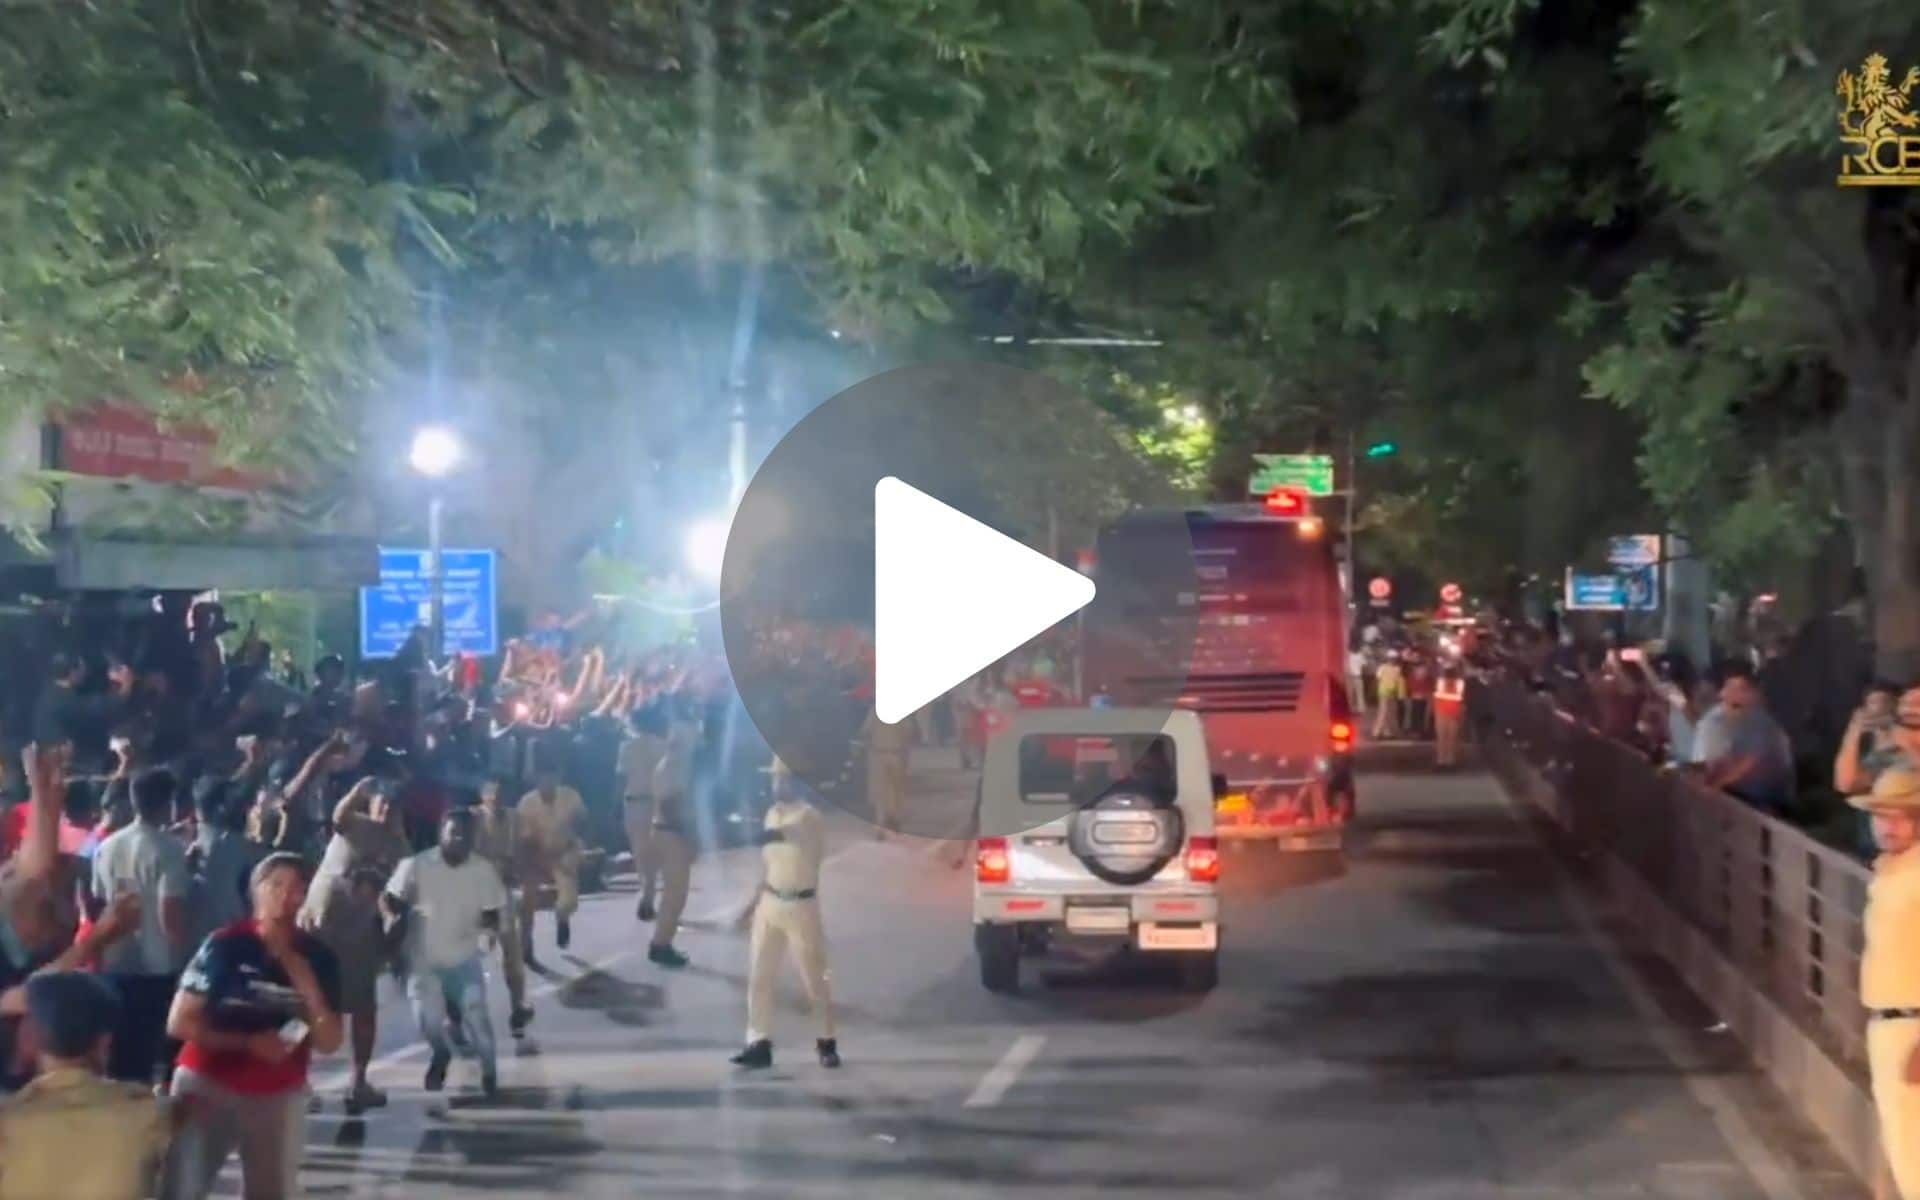 [Watch] RCB Fans Block Roads After Kohli & Co's Magical Performance To Qualify For Playoffs